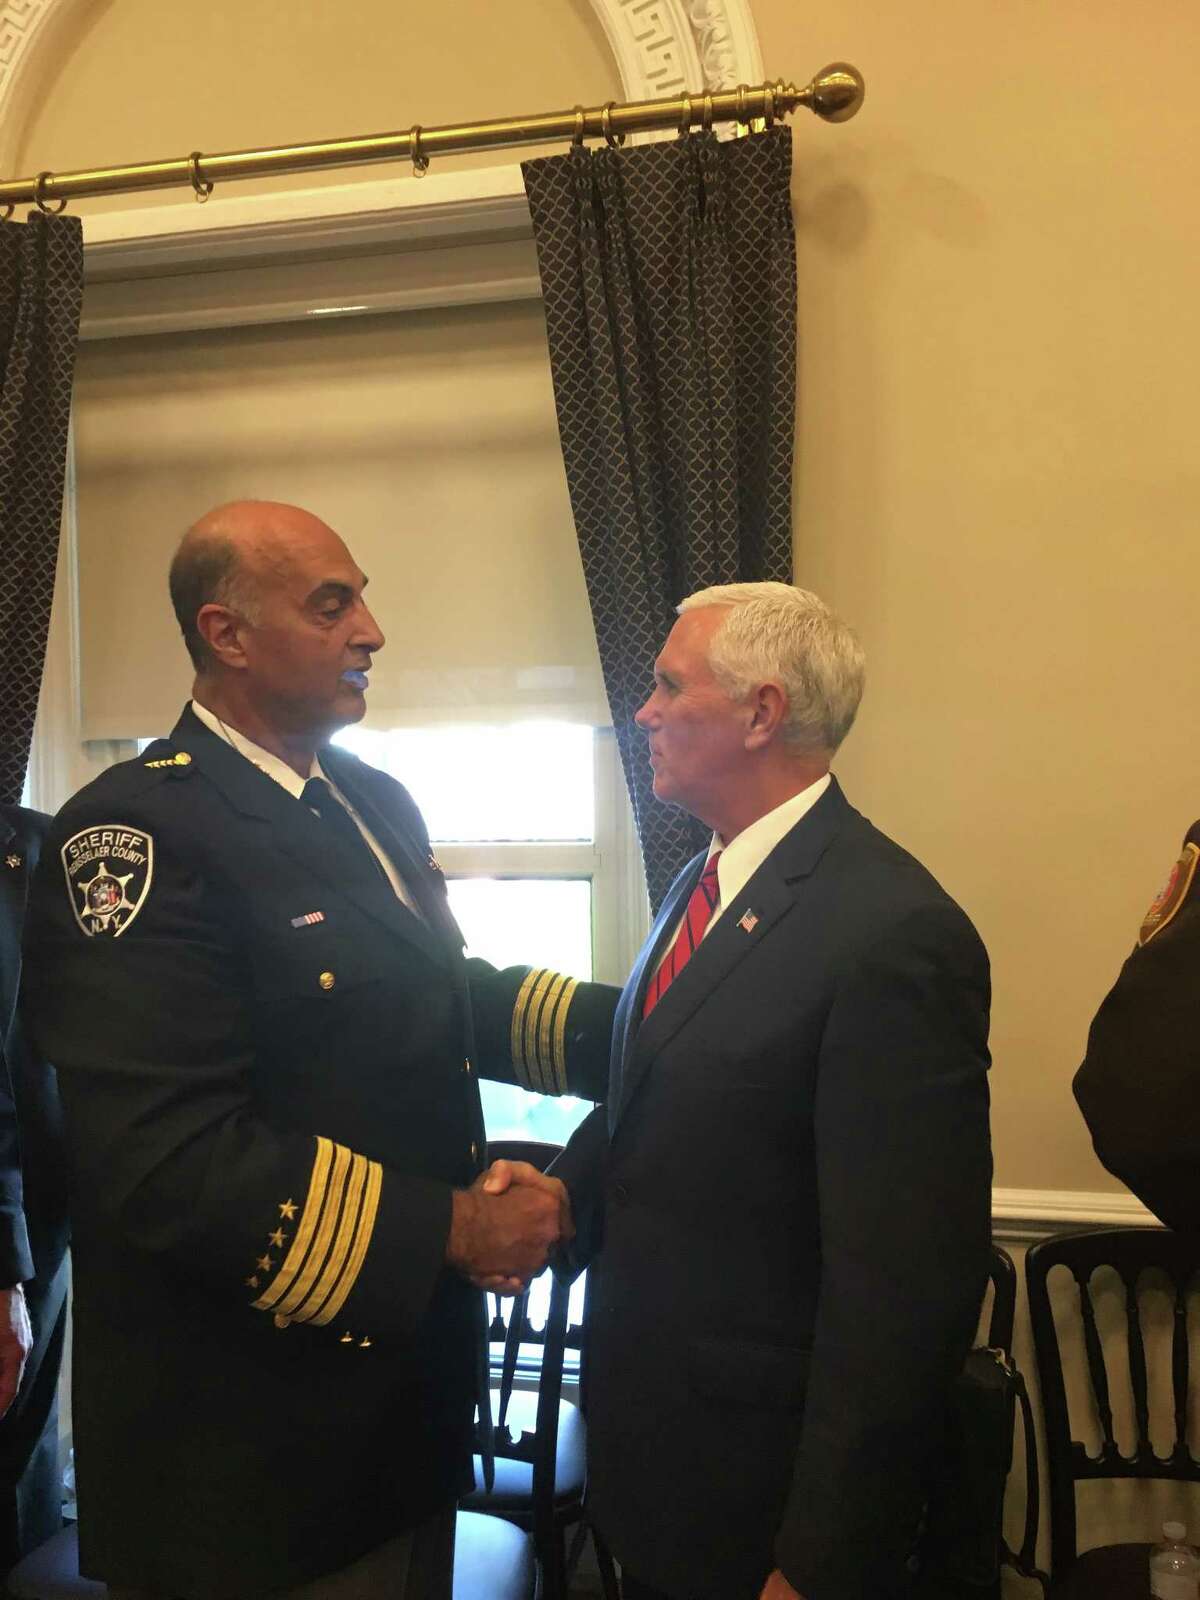 Rensselaer County Sheriff Patrick Russo shakes hands with Vice President Mike Pence at the White House, Washington D.C. Wednesday Sept. 5, 2018.